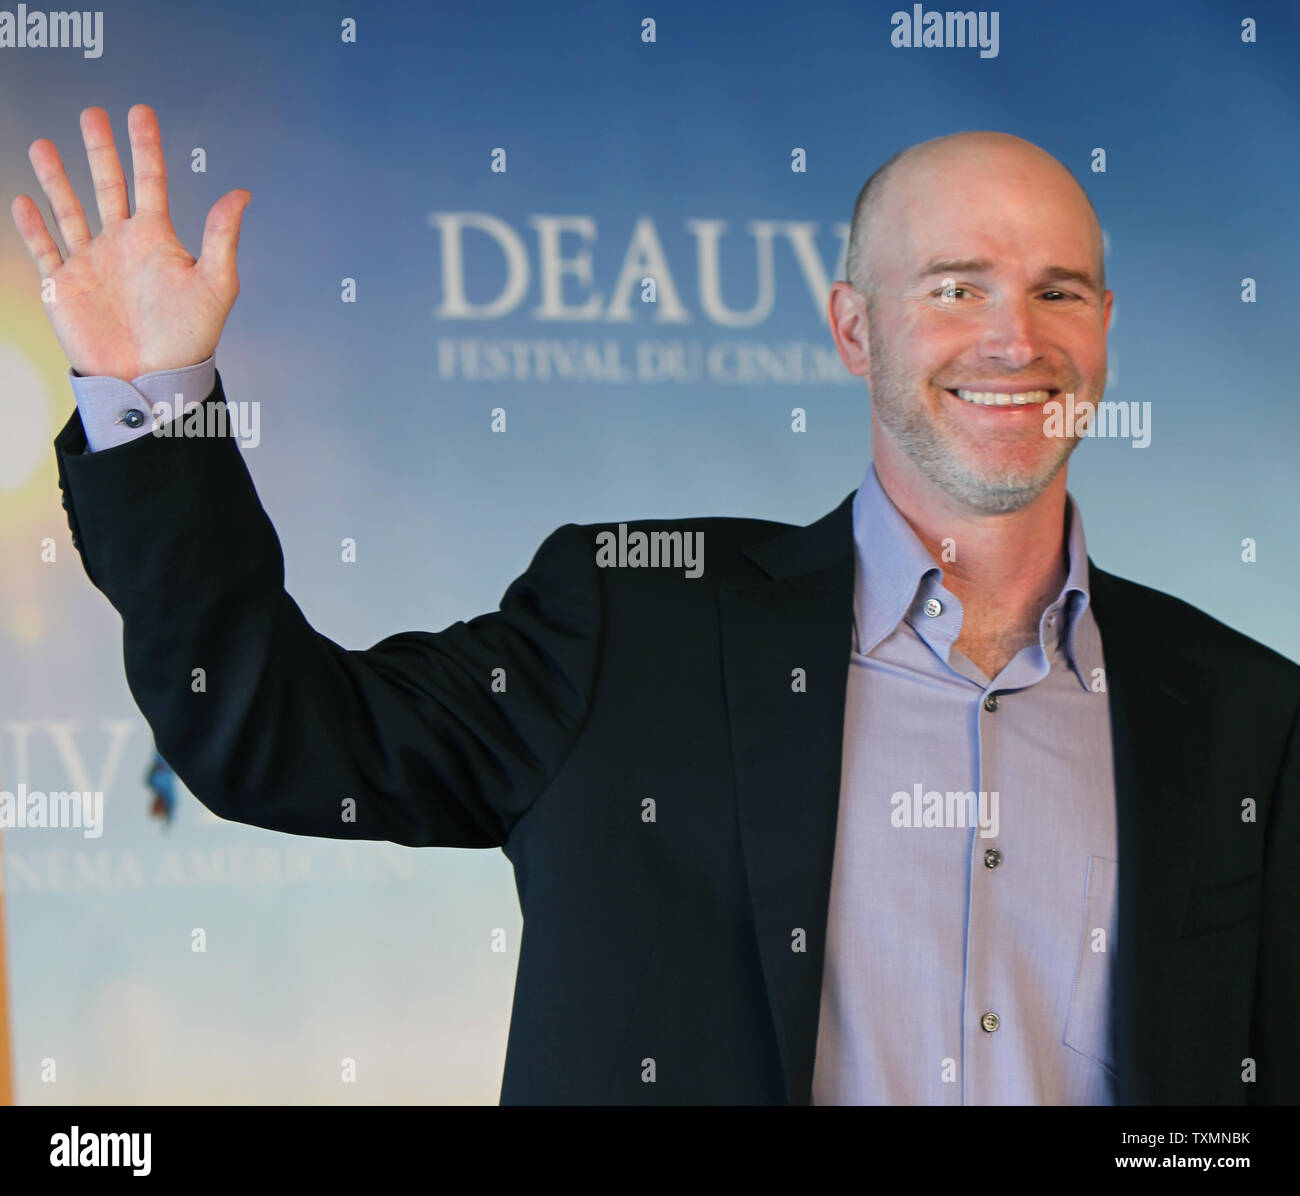 Director David Hollander gestures during a photocall for the film 'Personal Effects' at the 35th American Film Festival of Deauville in Deauville, France on September 7, 2009.    UPI/David Silpa Stock Photo